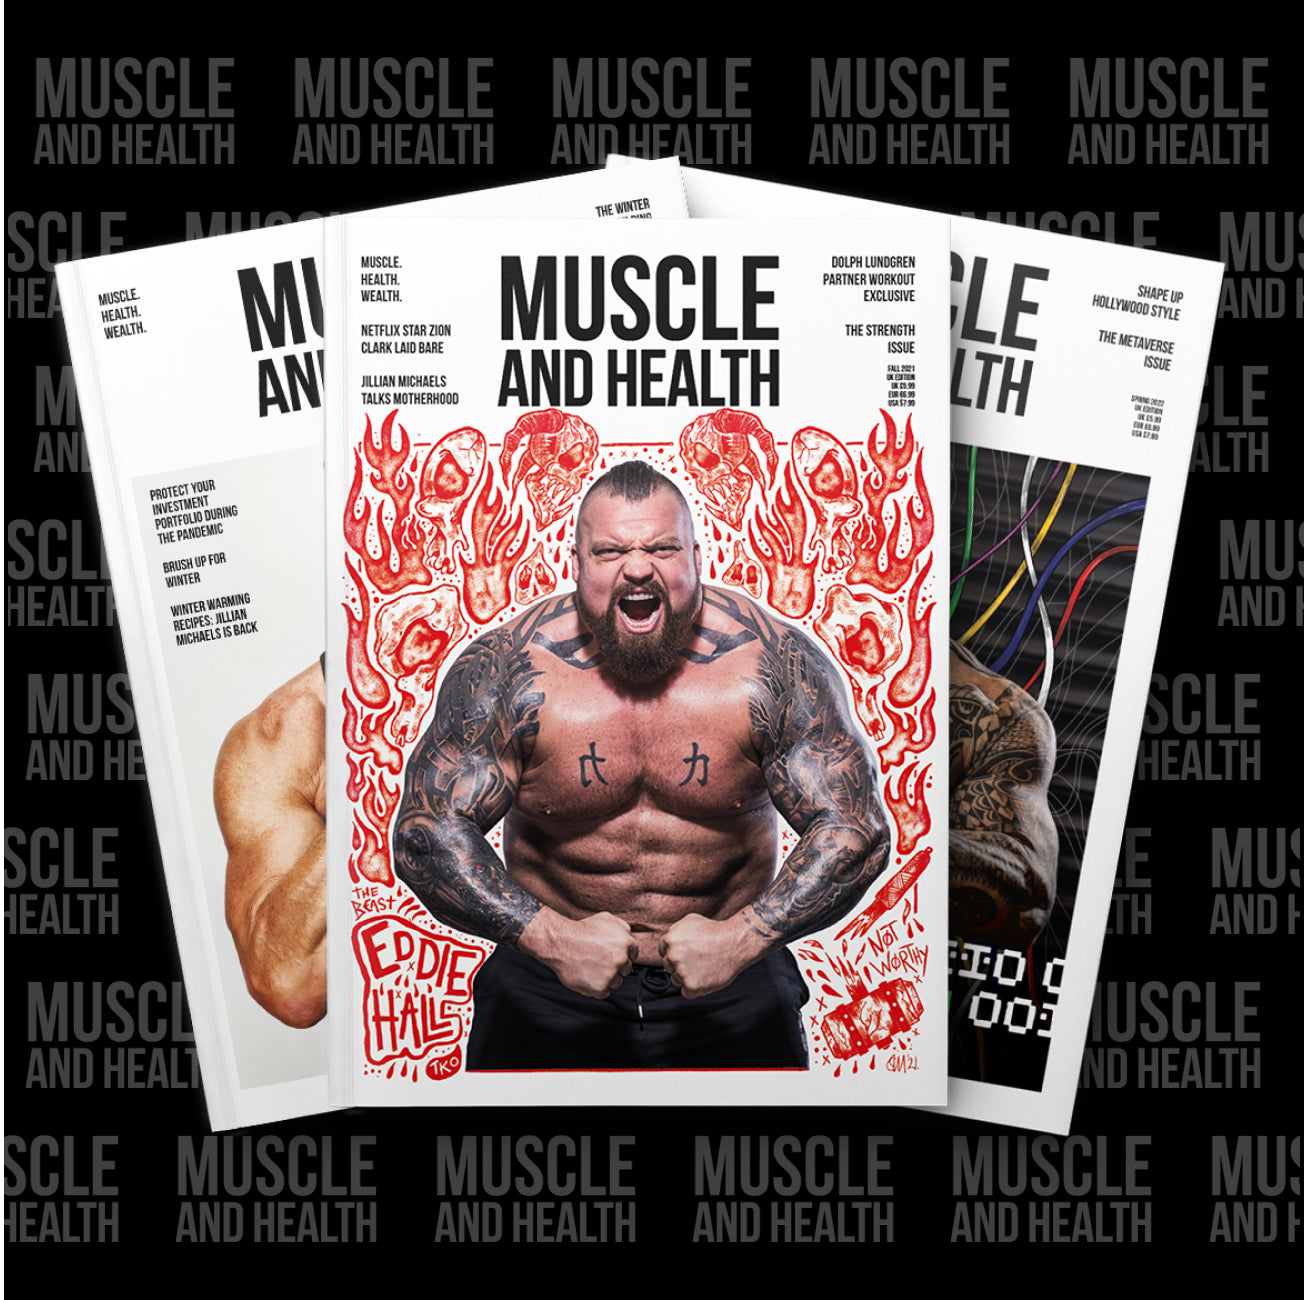 Muscle & Fitness Magazine Subscription